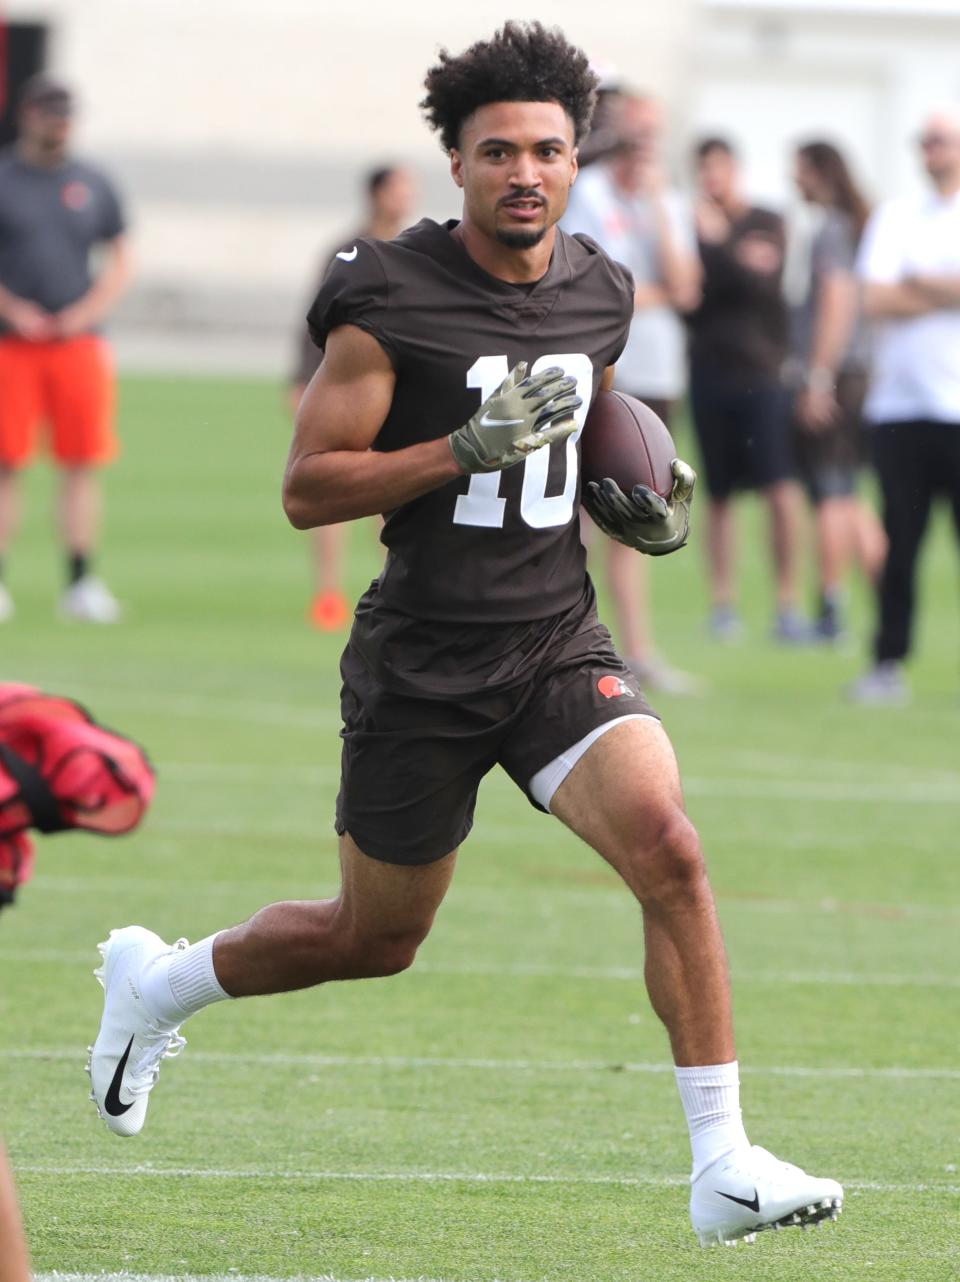 Cleveland Browns' Anthony Schwartz runs after making a catch during OTA workouts on Wednesday, June 1, 2022 in Berea.